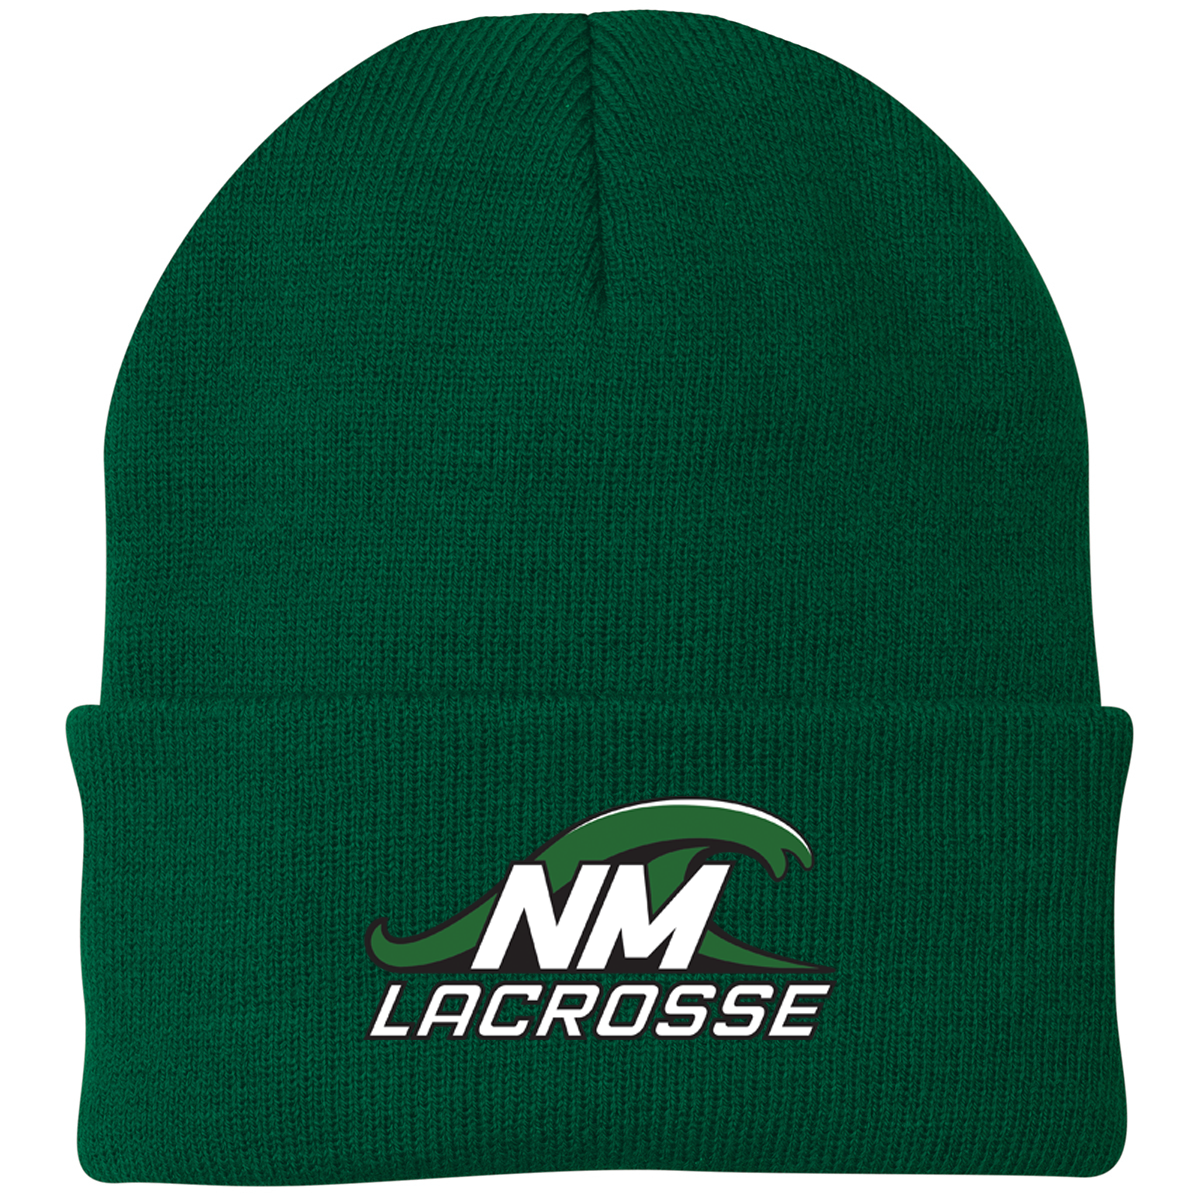 New Milford Youth Lacrosse Knit Beanie